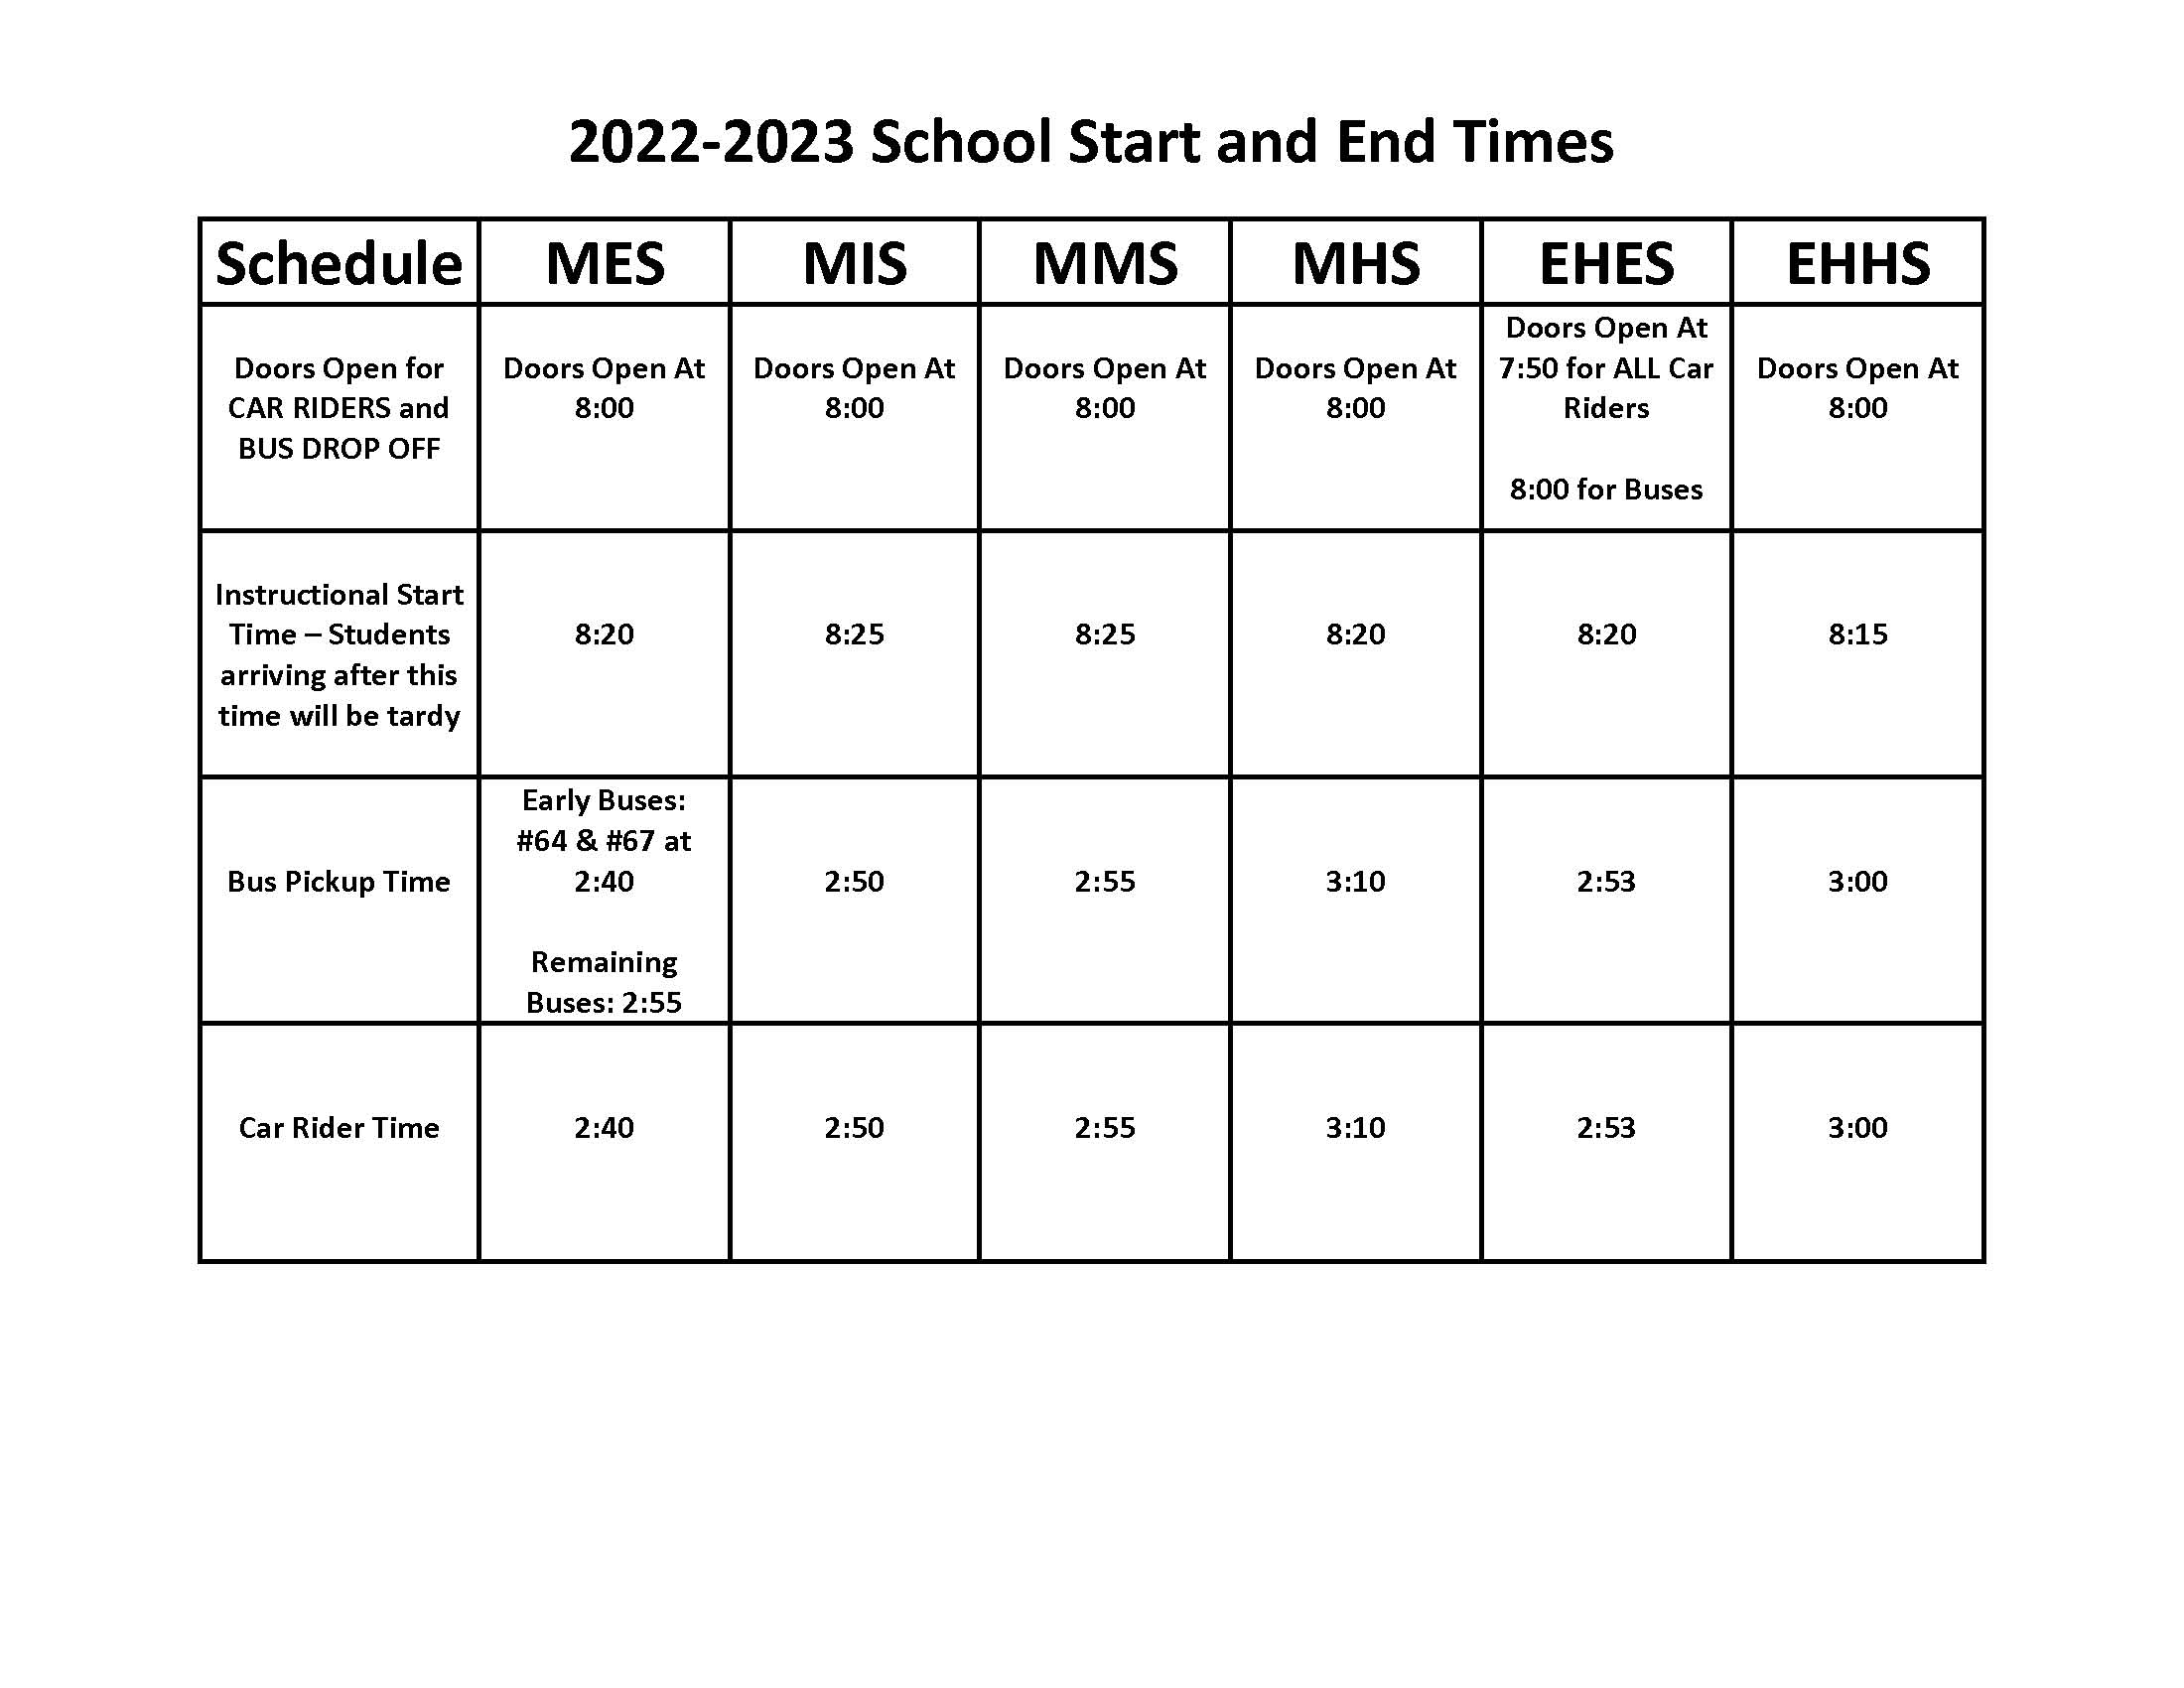 2022-2023 School Year Start and End Times